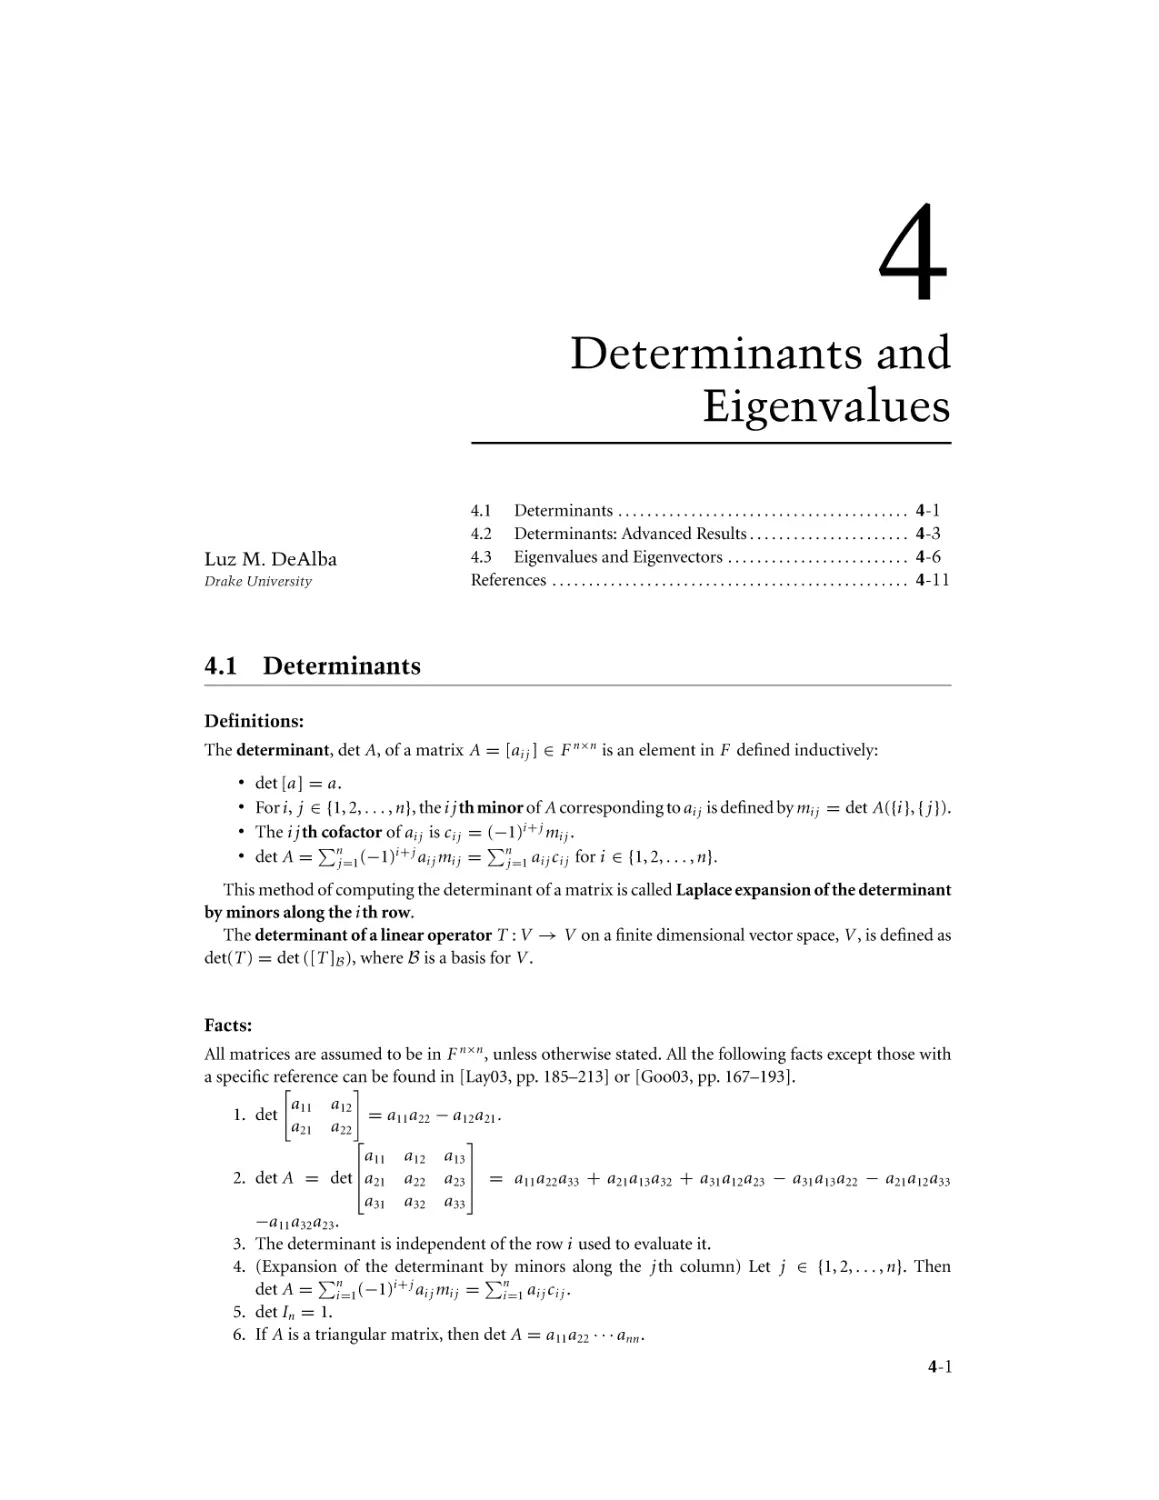 Chapter 4. Determinants and Eigenvalues